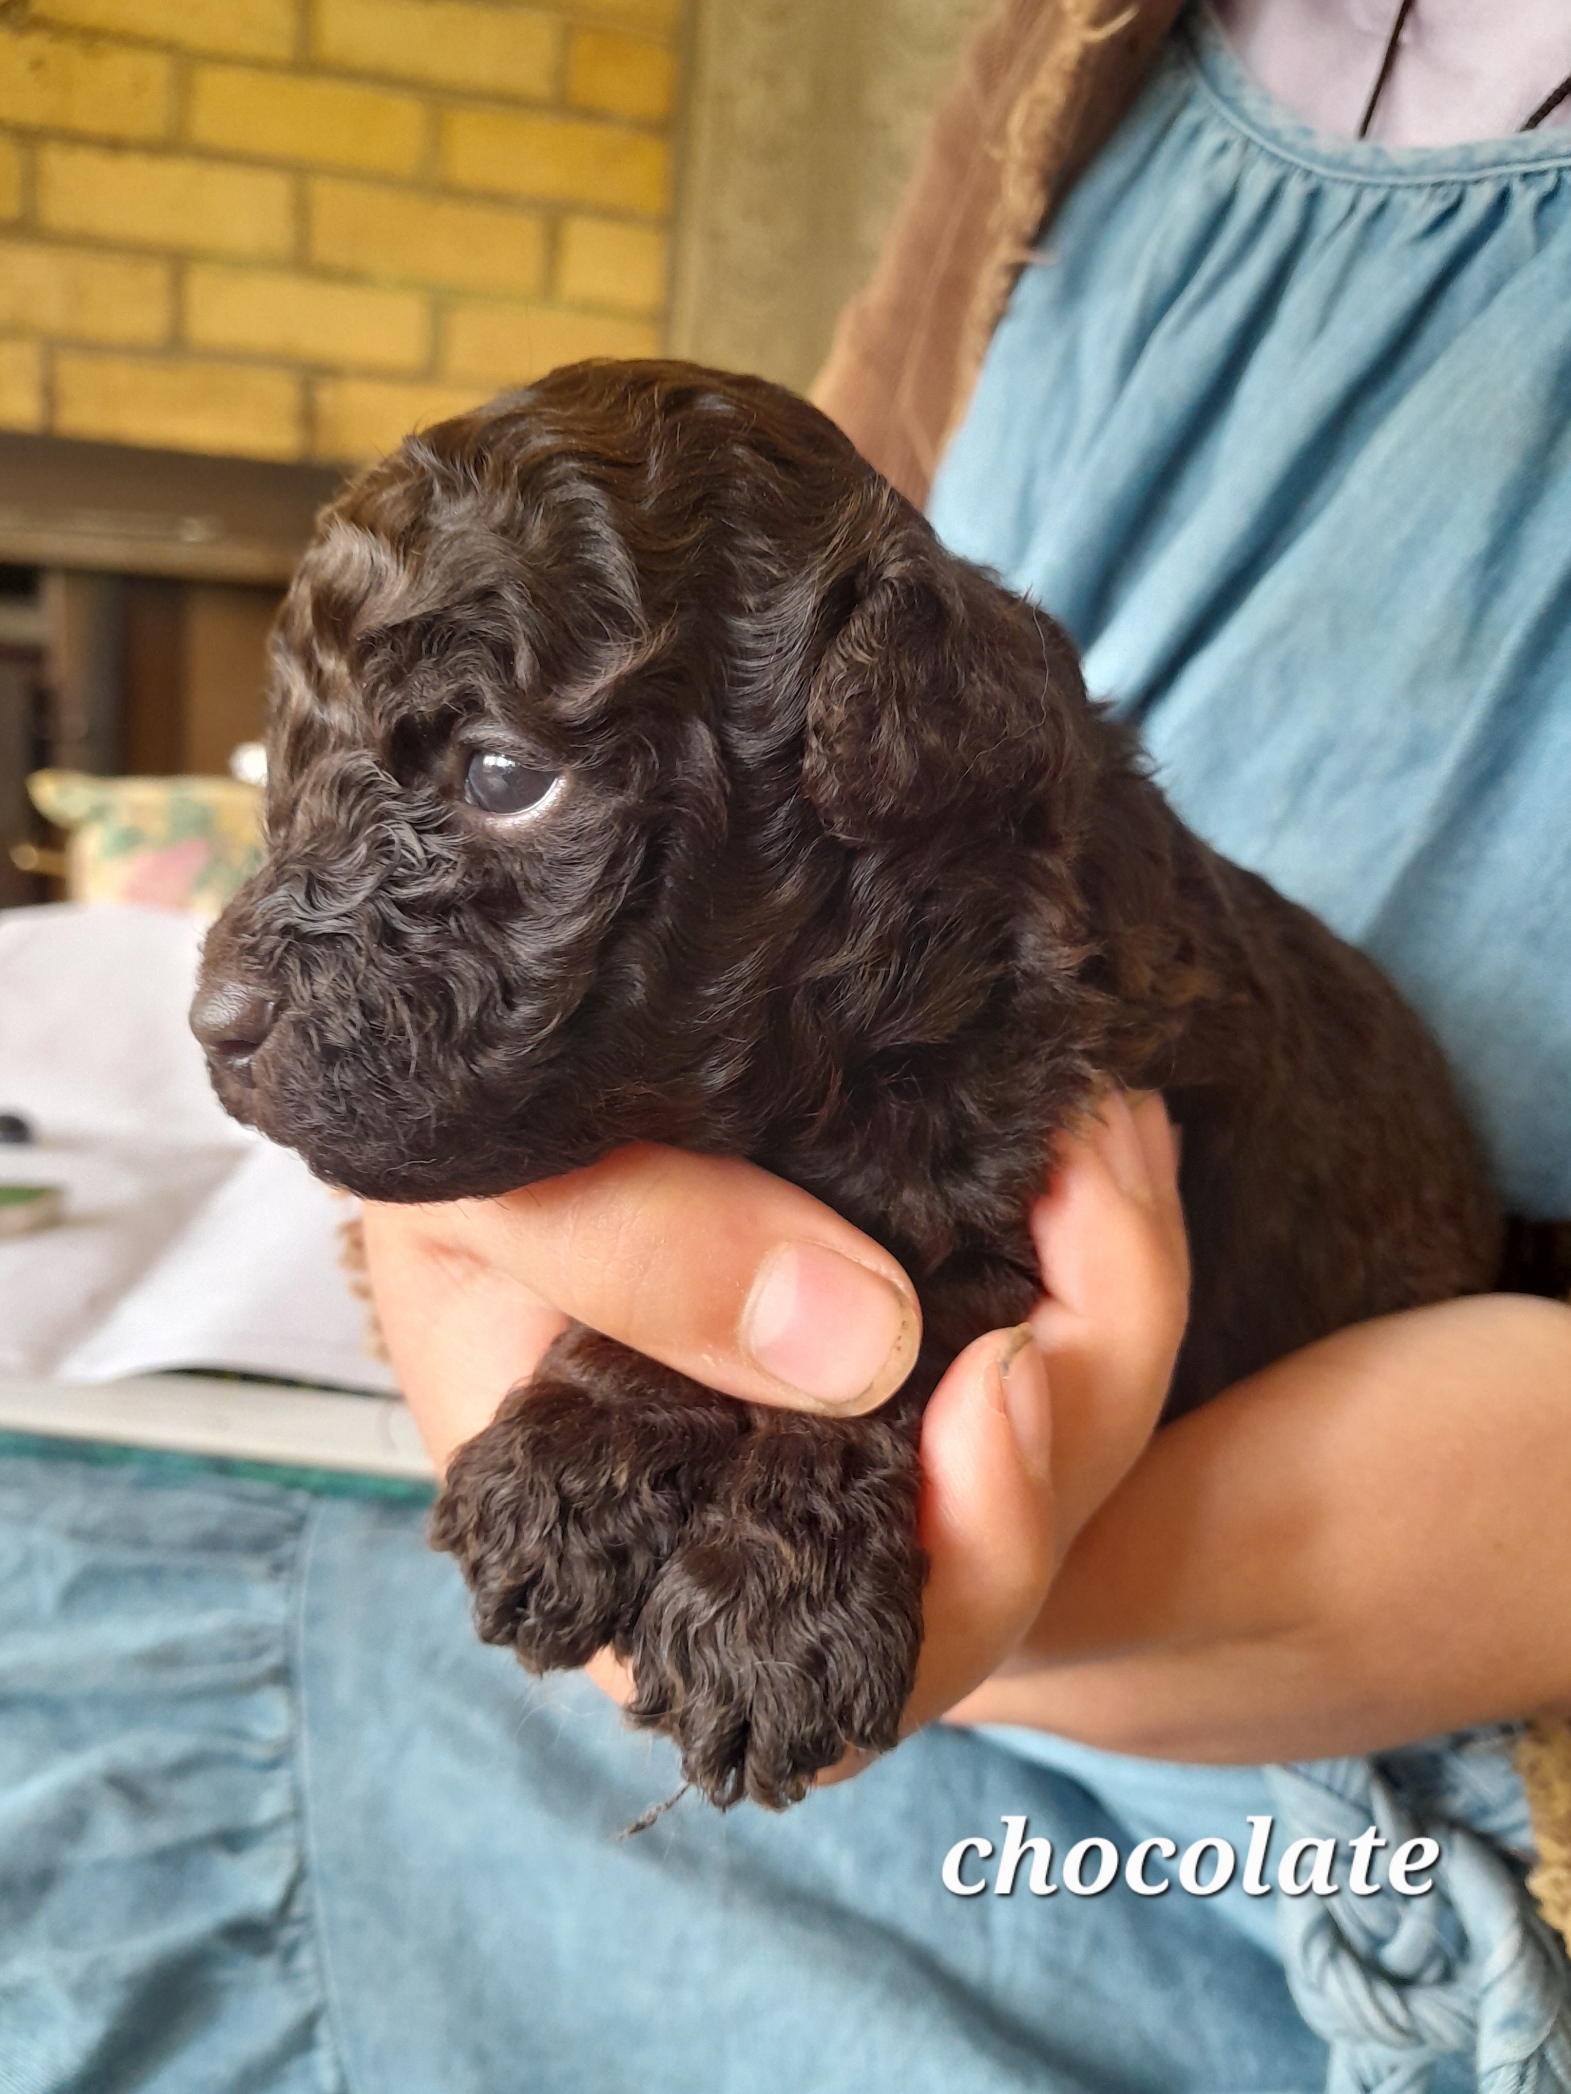 Purebred Chocolate Toy Poodle Pup